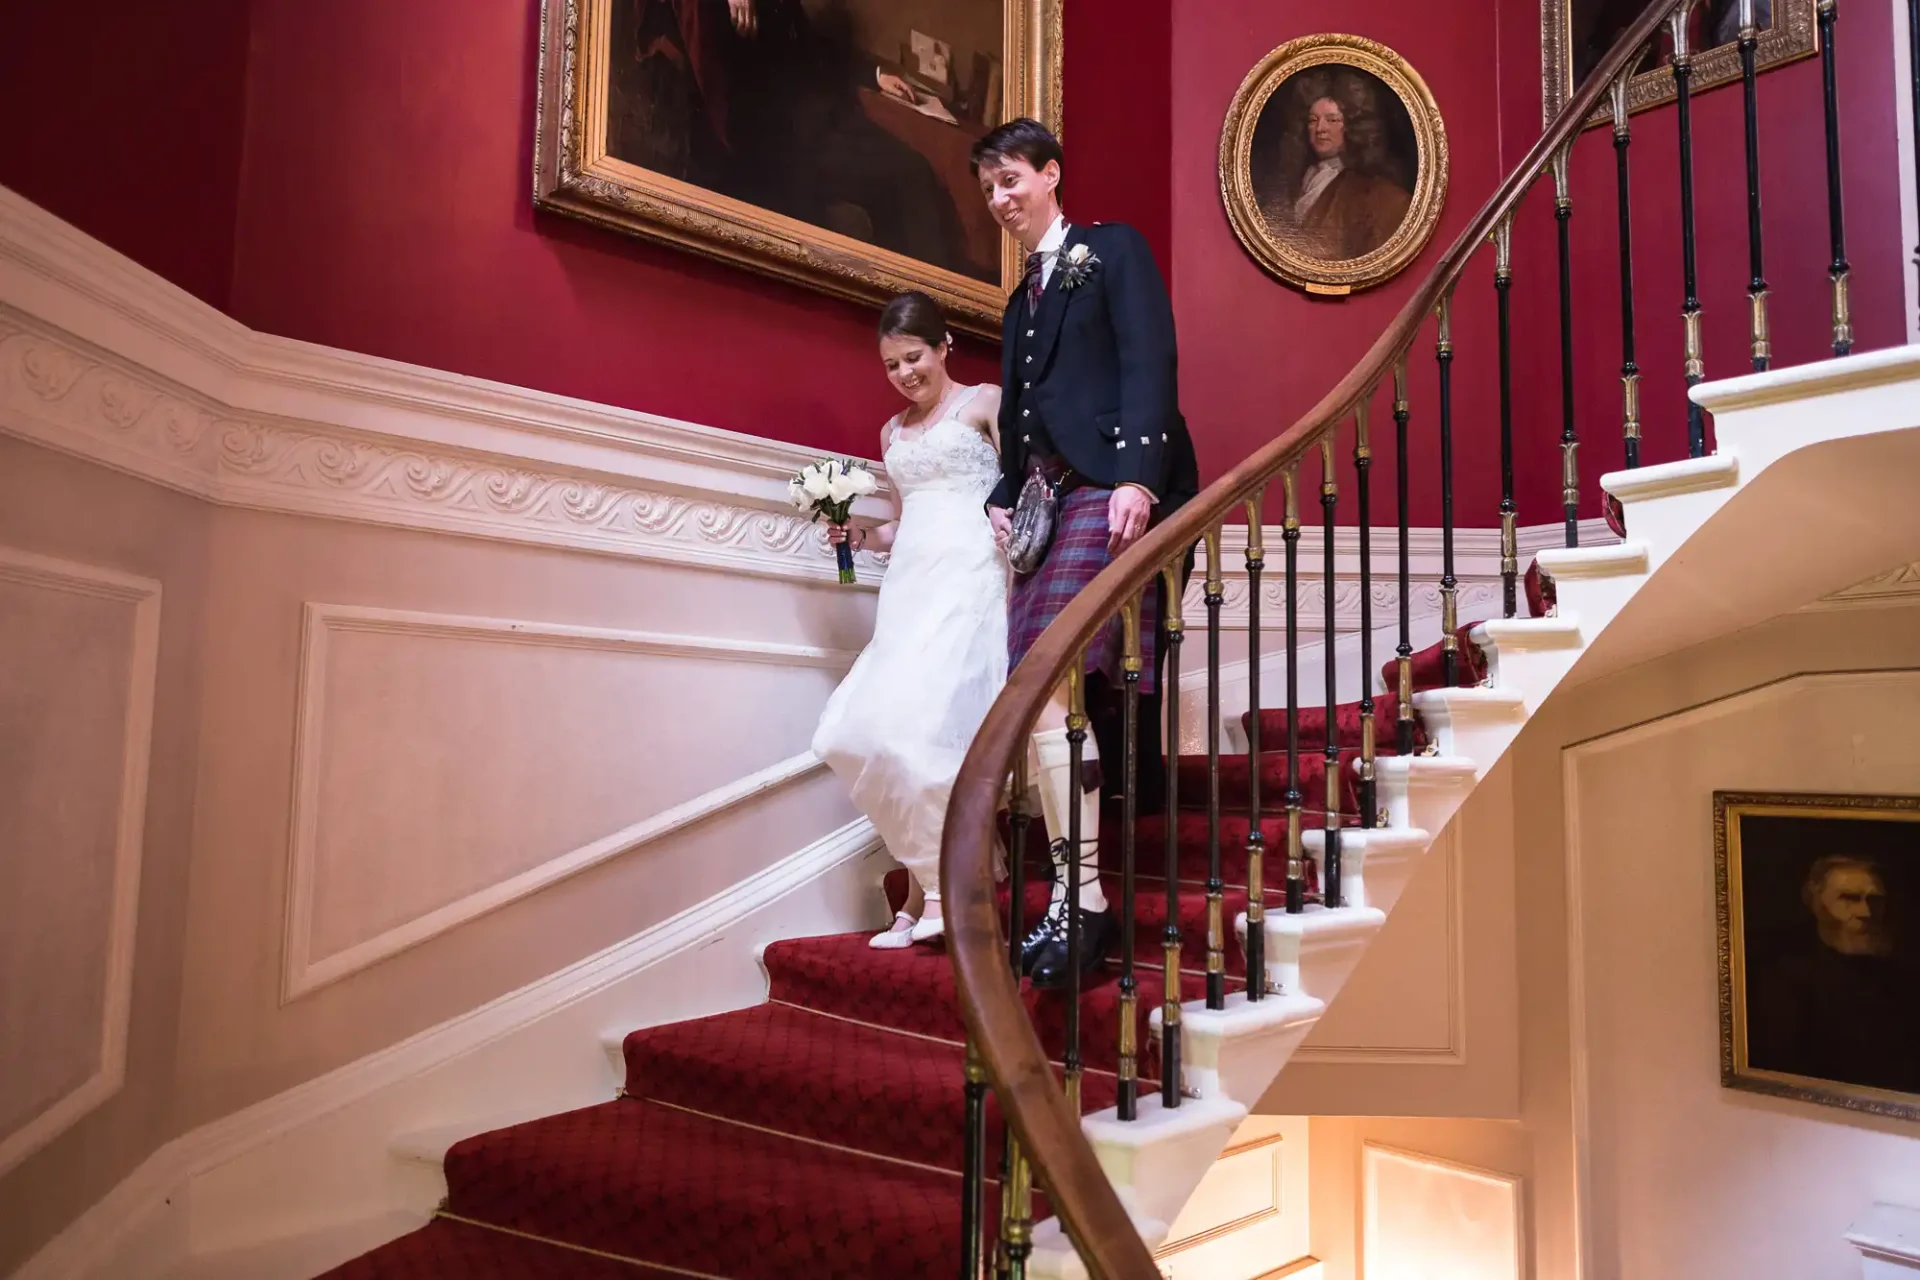 A bride and groom in traditional attire smiling as they descend a grand staircase with red carpeting in an elegant interior.